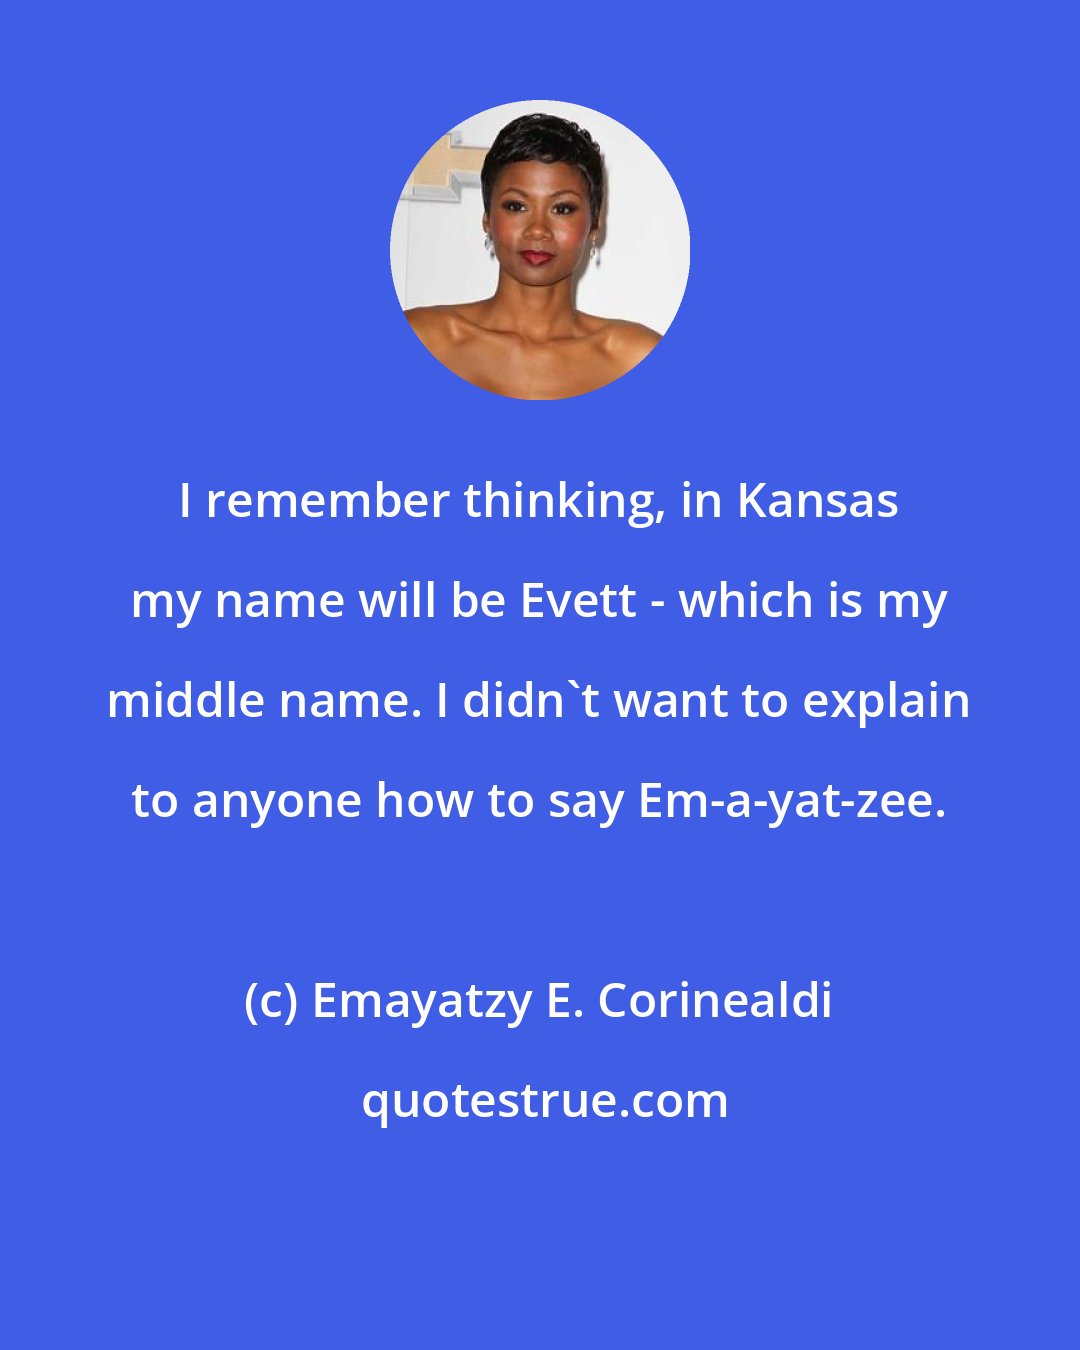 Emayatzy E. Corinealdi: I remember thinking, in Kansas my name will be Evett - which is my middle name. I didn't want to explain to anyone how to say Em-a-yat-zee.